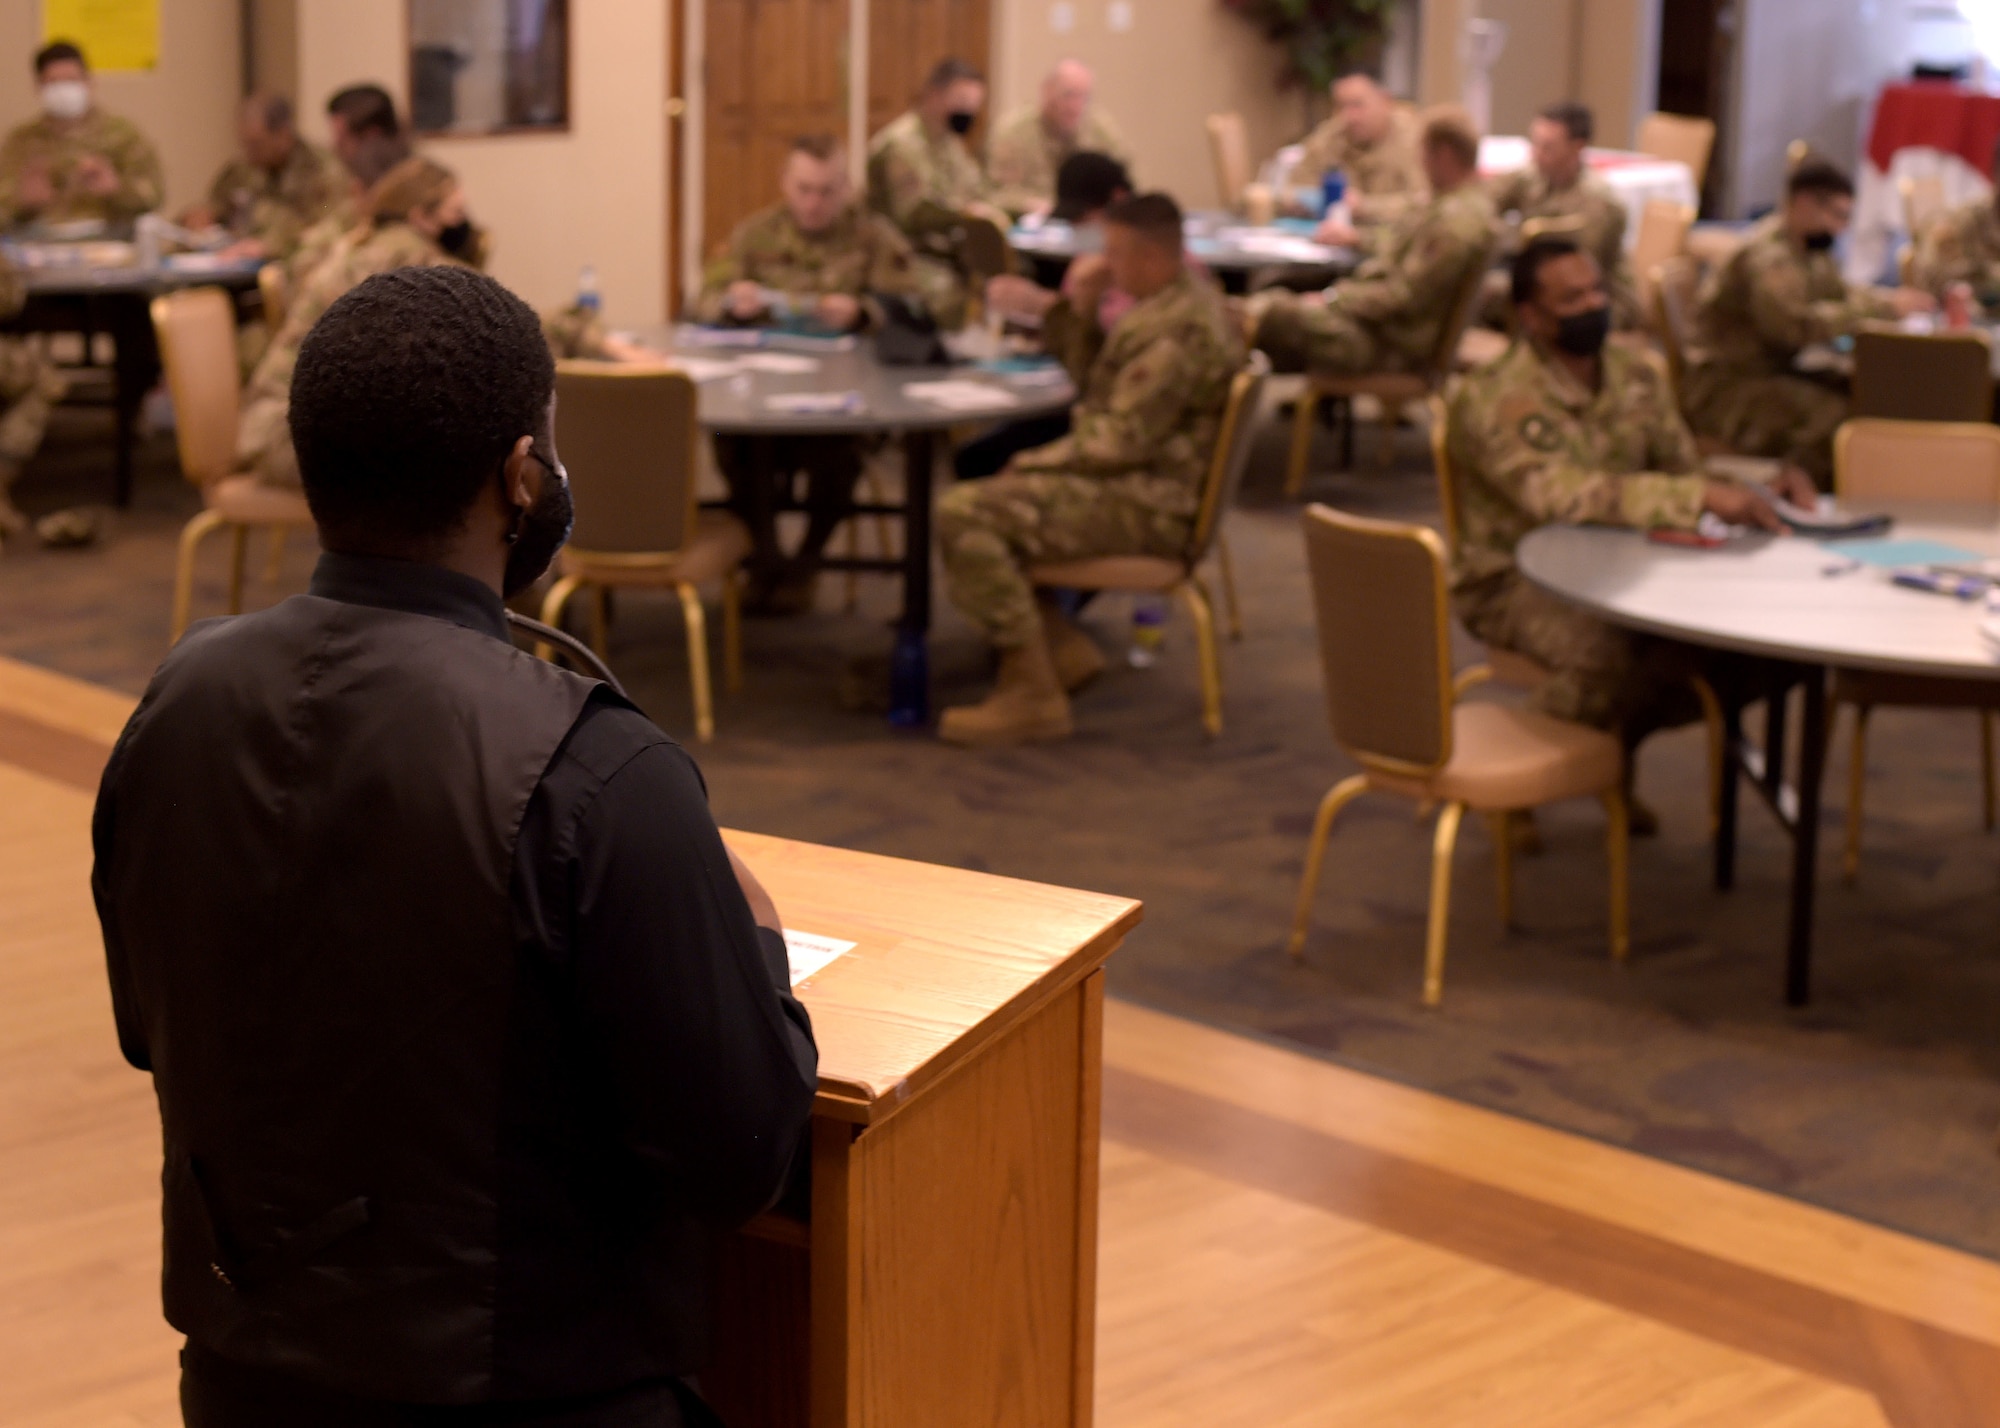 Airman delivers opening remarks at training event